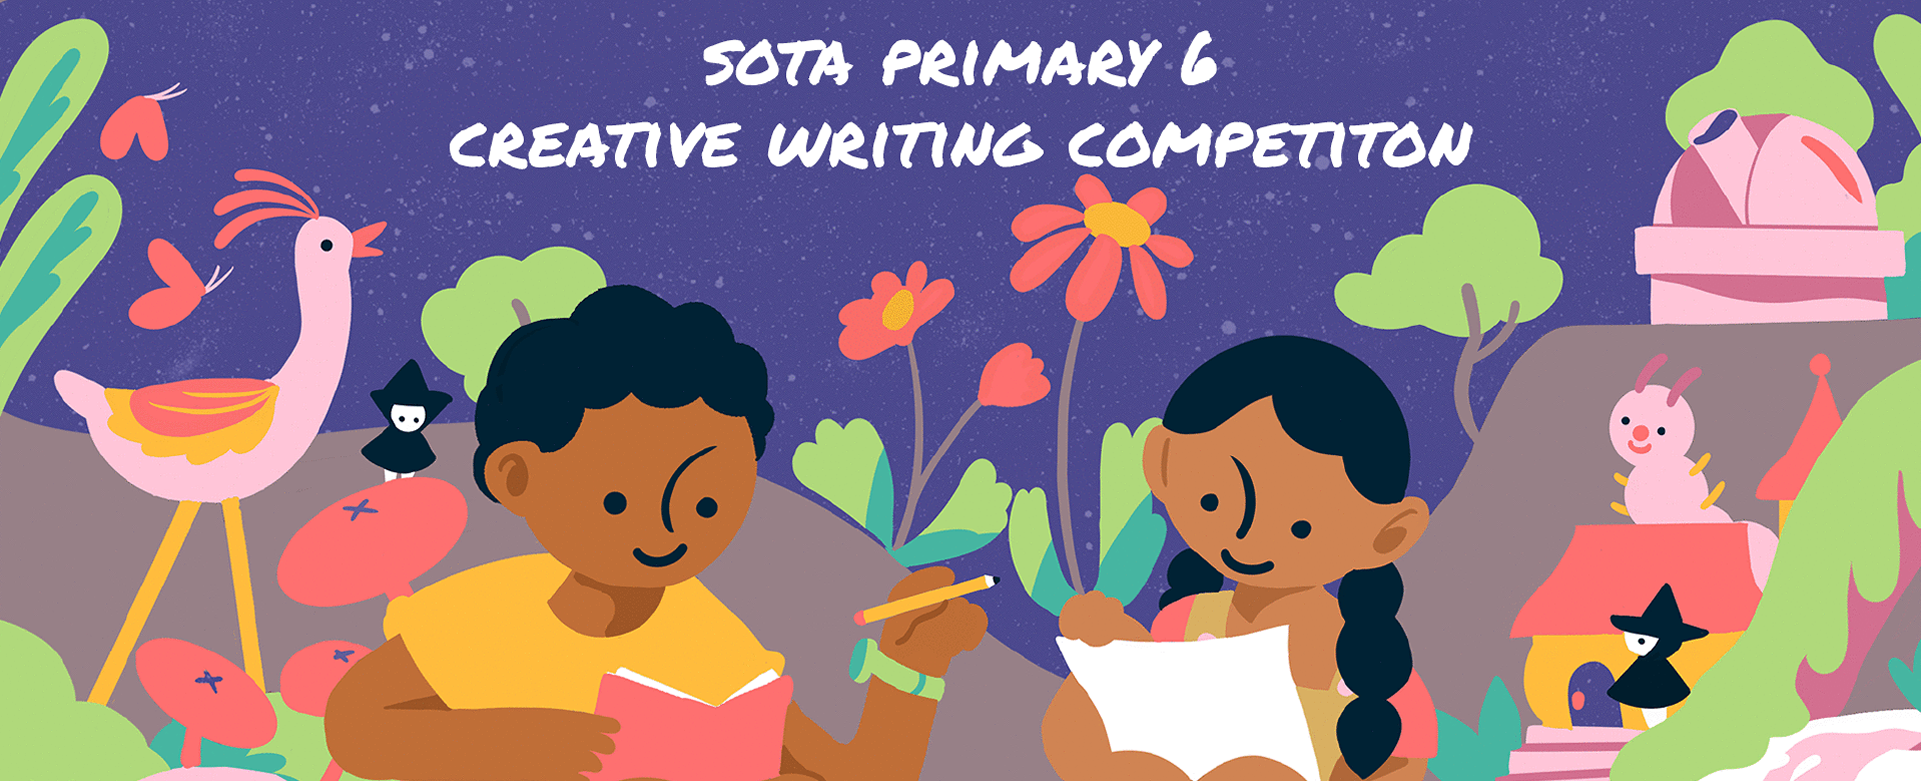 sota primary 6 creative writing competition 2021